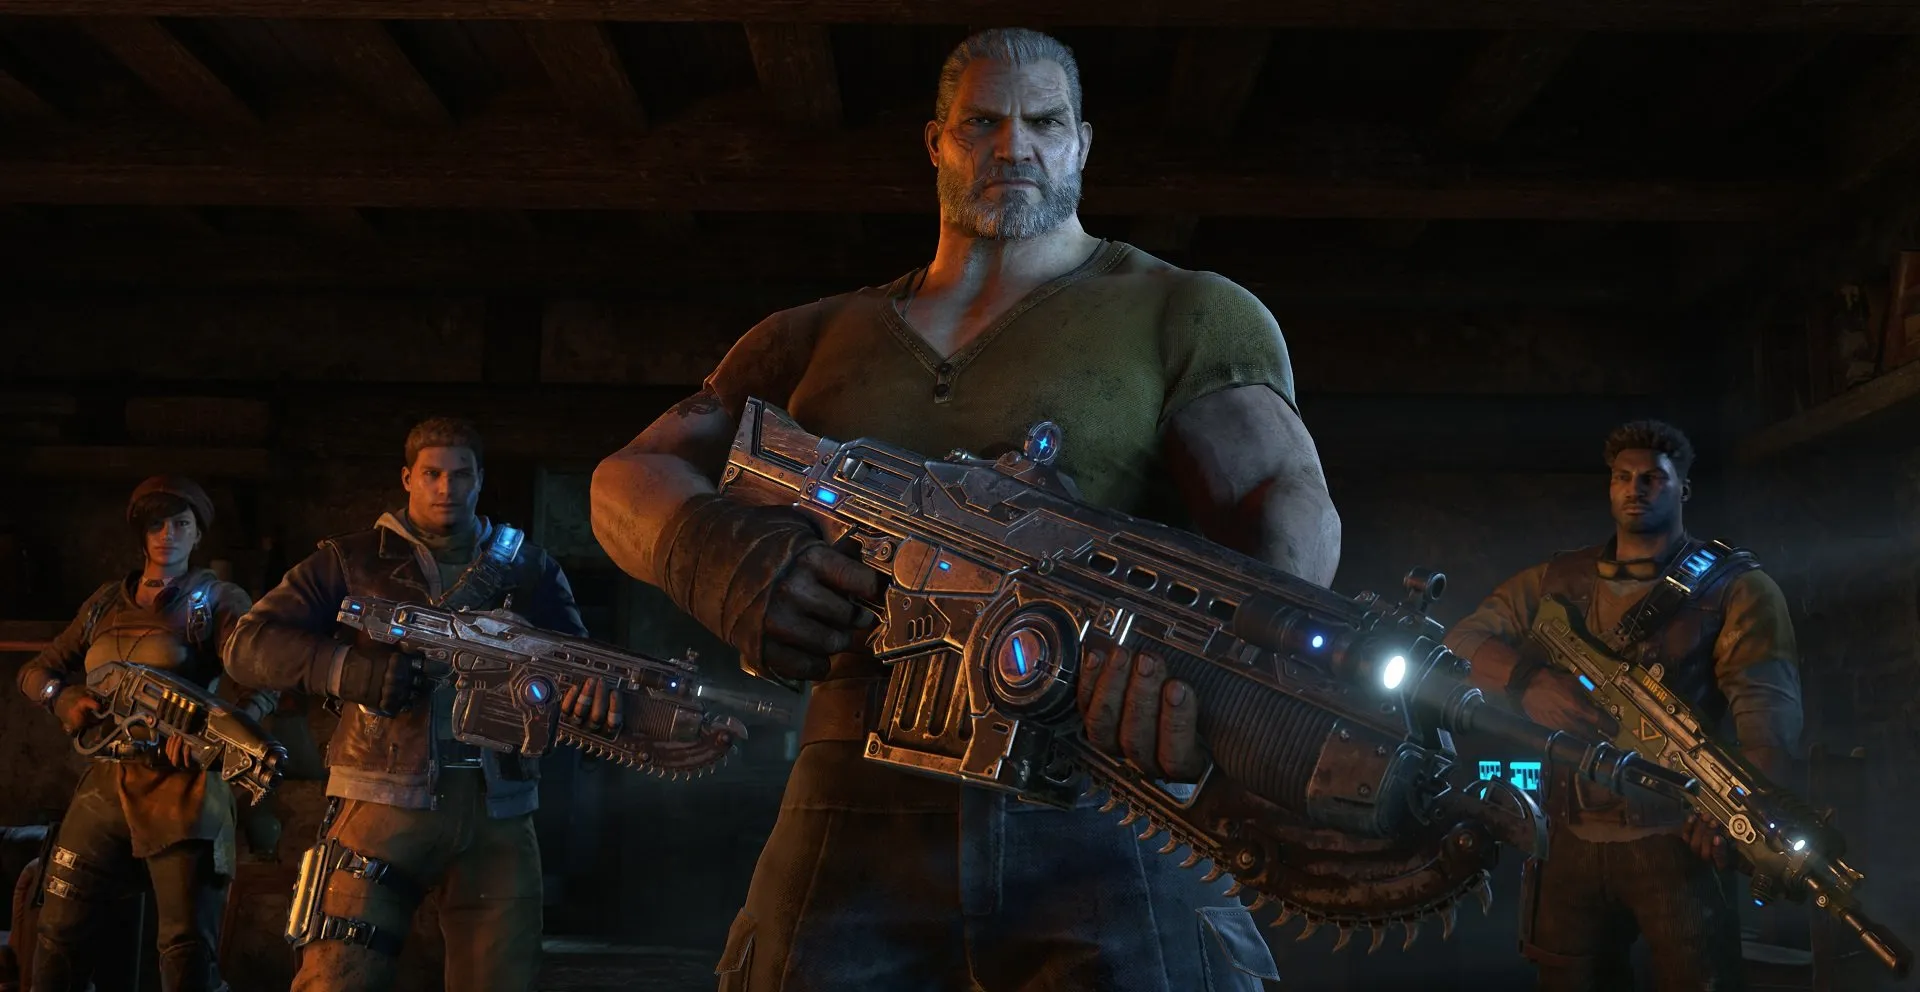 Gears of War 4' has new heroes, but same old gameplay